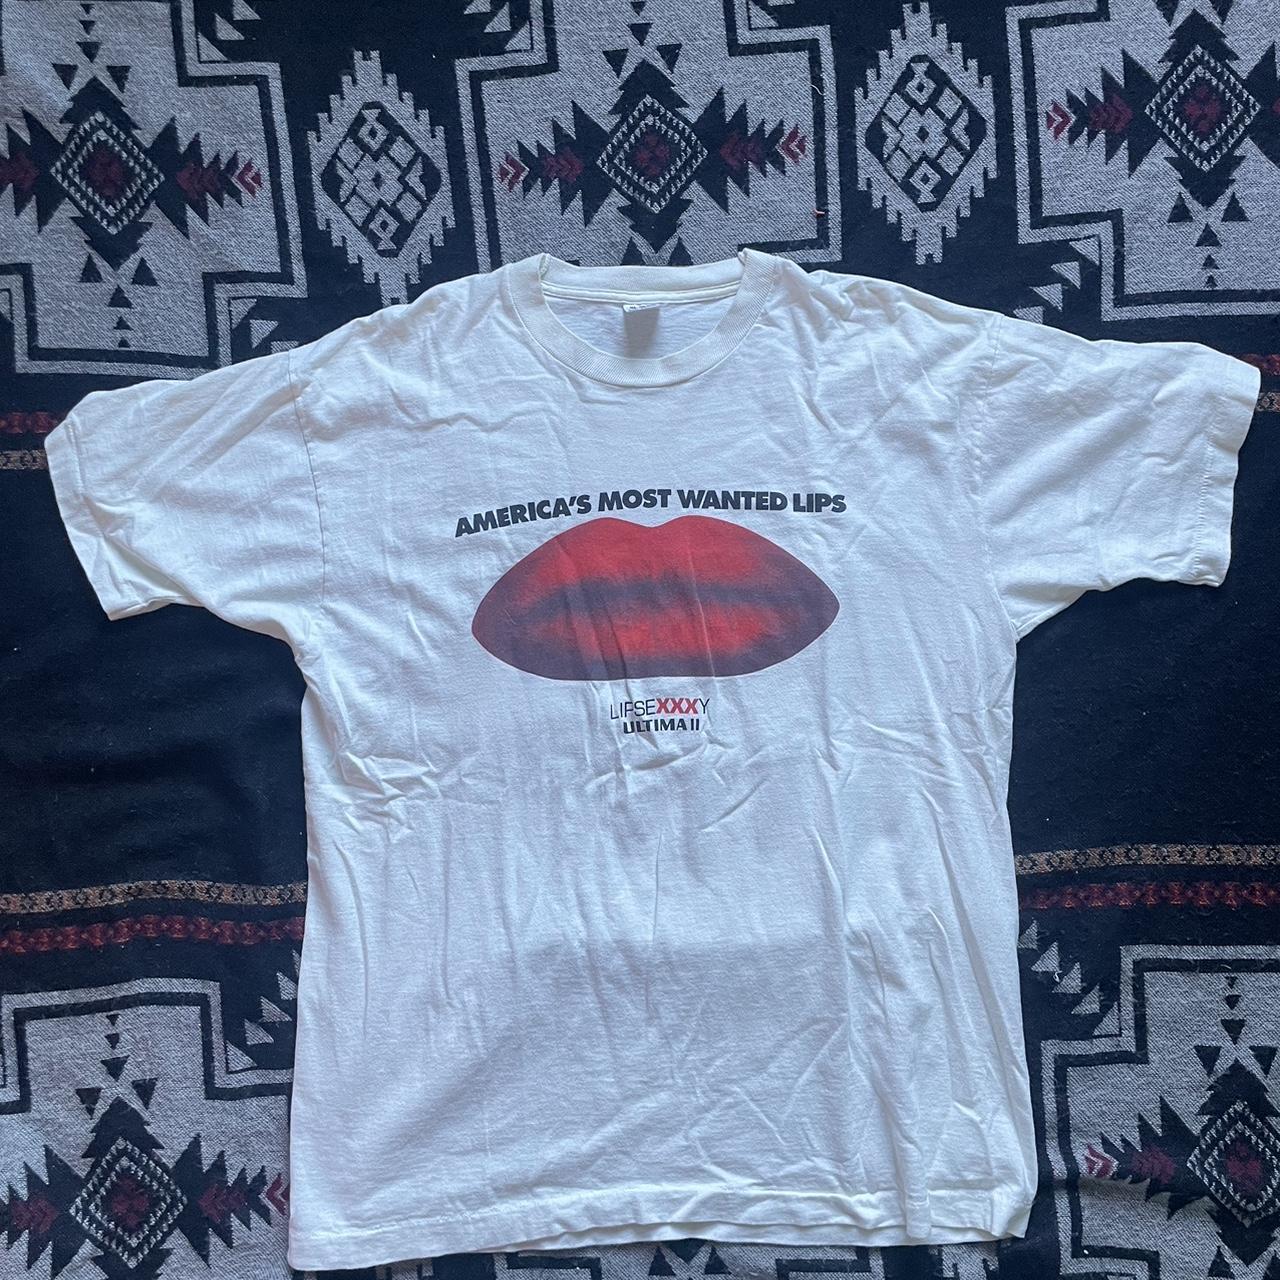 Reclaimed Vintage Men's White and Red T-shirt